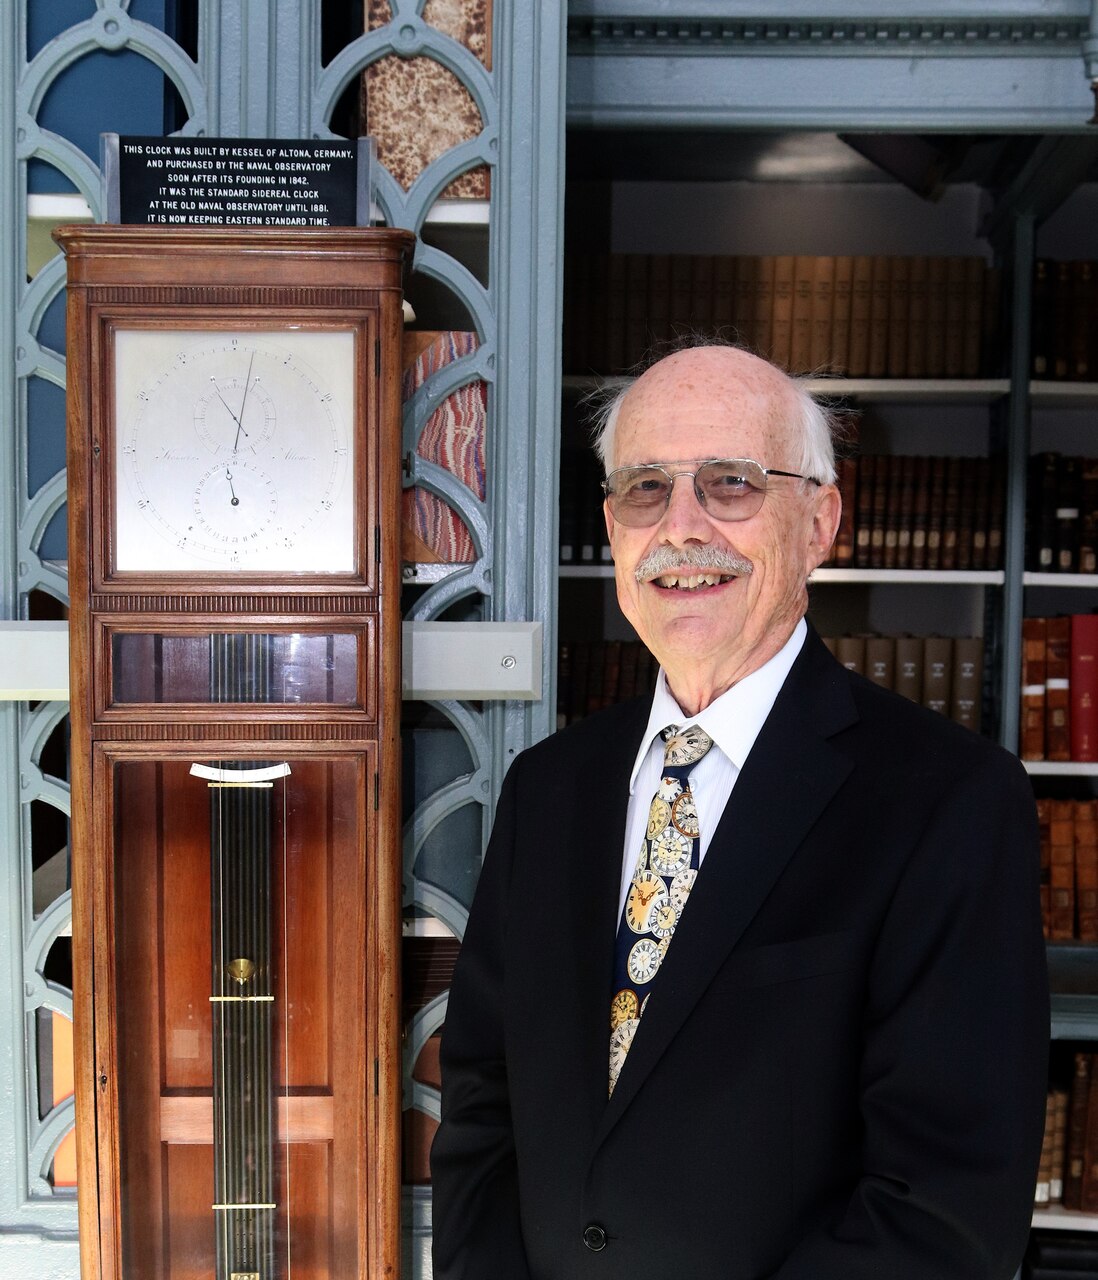 Dr. Dennis McCarthy─former Director of the Directorate of Time at the U.S. Naval Observatory (USNO) and GPS pioneer─was inducted into Naval Oceanography Hall of Fame in ceremony hosted by USNO, April 6, 2023.
Considering McCarthy’s career as UNSO’s former Director of the Directorate of Time from 1996 to 2005 and a list of stellar, professional feats; his induction comes with open arms awaiting his arrival.
“For the last half century, Dennis has quietly served as the internationally recognized subject matter expert (SME) for Precise Time and Earth Orientation, ensuring the accuracy of navigation products used globally.” said CAPT H. F. “Rip” Coke, USNO Superintendent/Commanding Officer. “Basically, anyone who has ever used GPS to accurately arrive at their target destination should thank him.”
Along with being a founding member of the International Earth Rotation and Reference System Service (IERS), McCarthy achieved milestones during his career at USNO that shaped global-society and changed world.